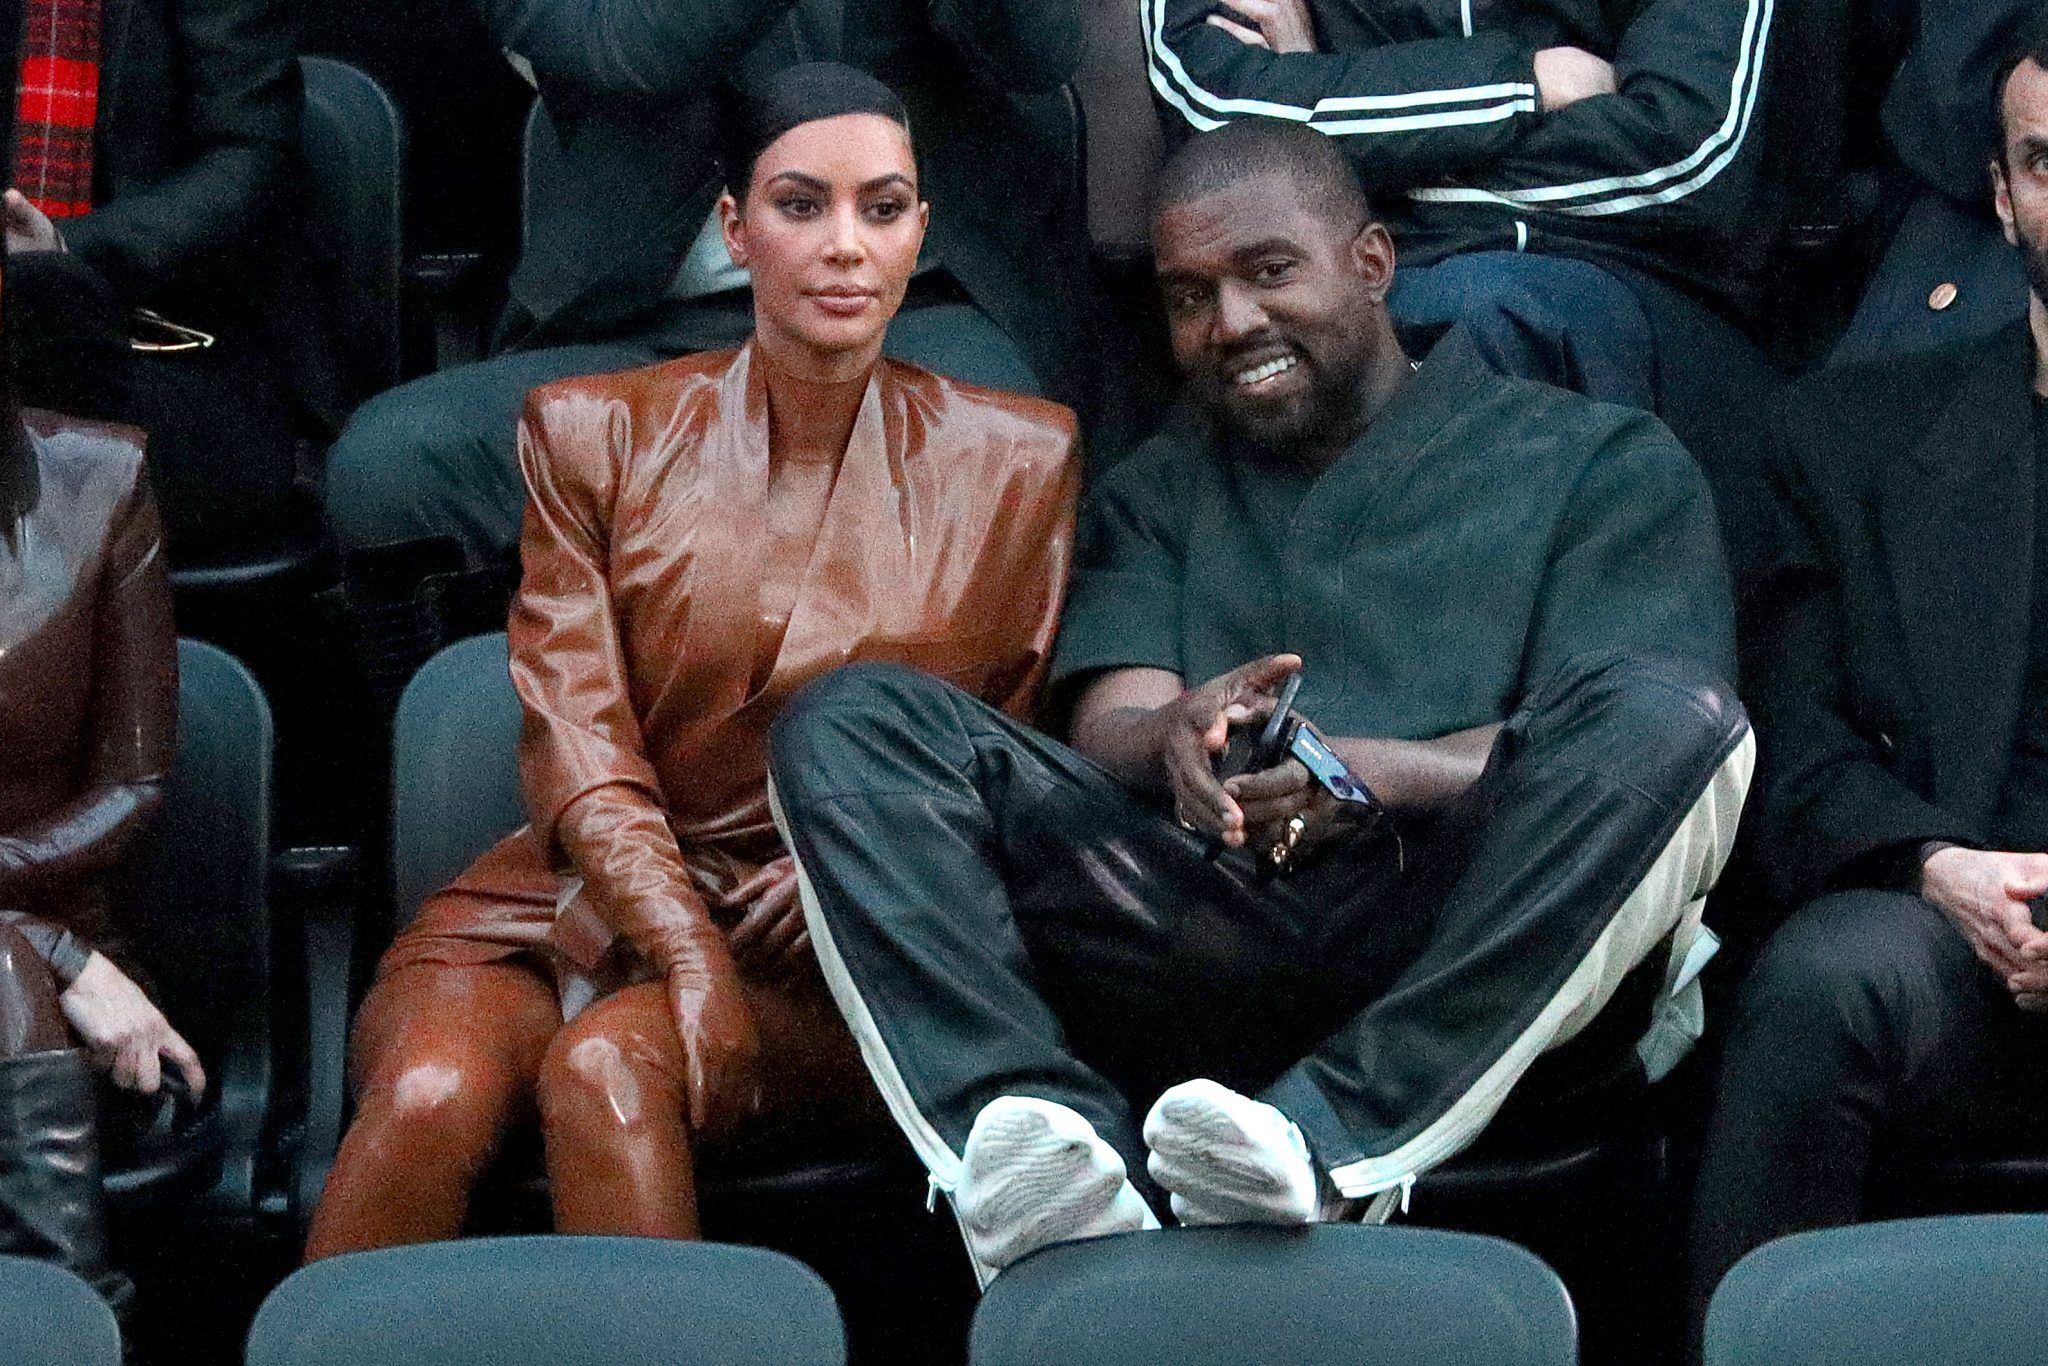 Related links: Kanye West returns to Instagram with cryptic post celebrating Kim Kardashian and Pete Davidson split Internet has the best reaction to Kim Kardashian and Pete Davidson 'split' Kourtney Kardashian marries Travis Barker in Las Vegas ceremony after Grammys - report claims